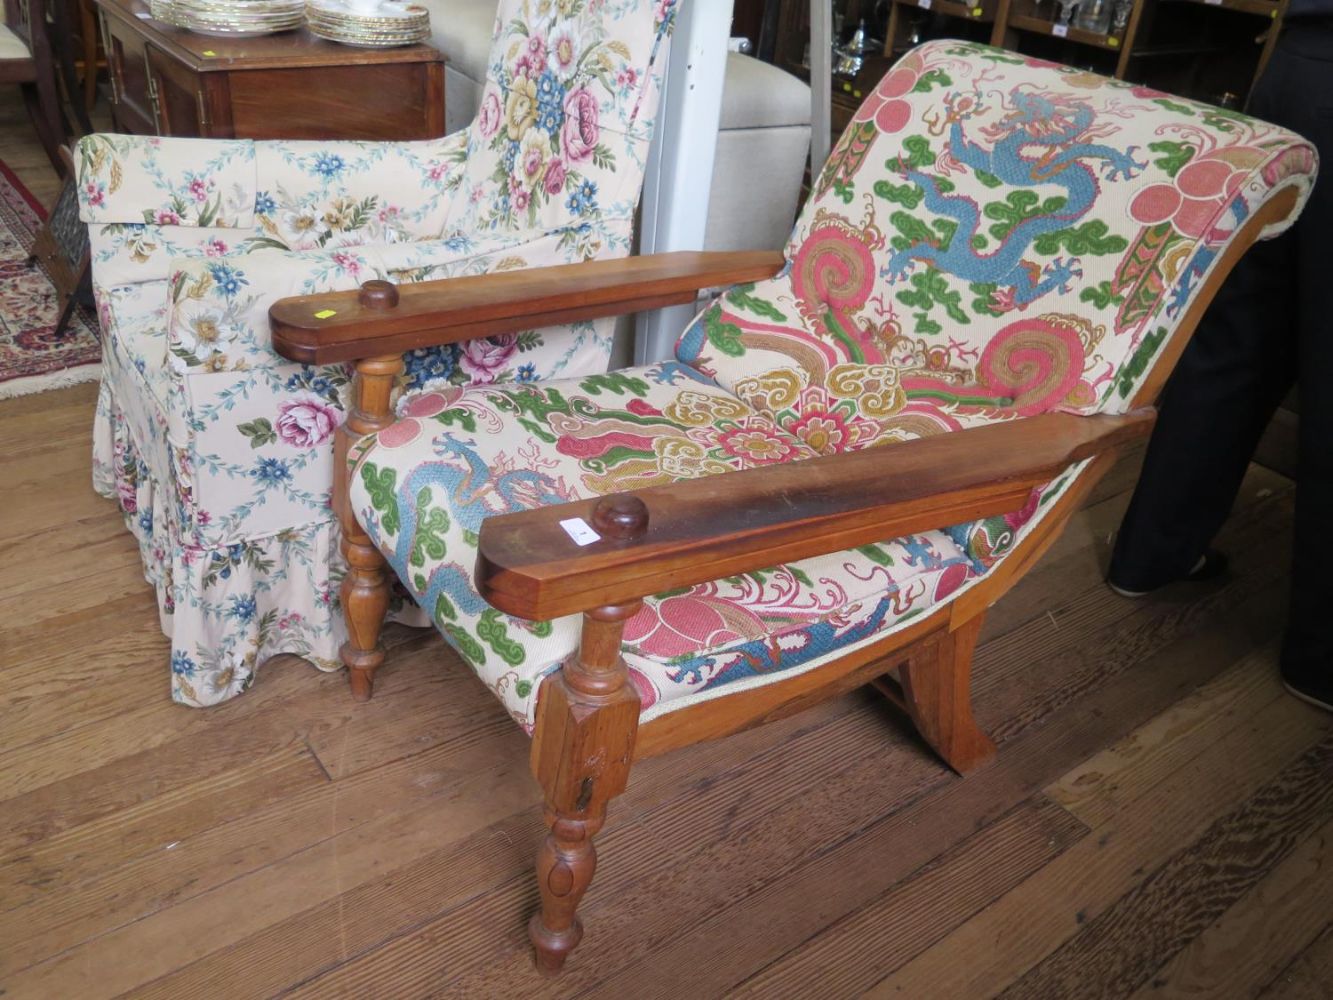 Antique & Collectables - IN HOUSE VIEWING AND AUCTION STRICTLY BY APPOINTMENT ONLY